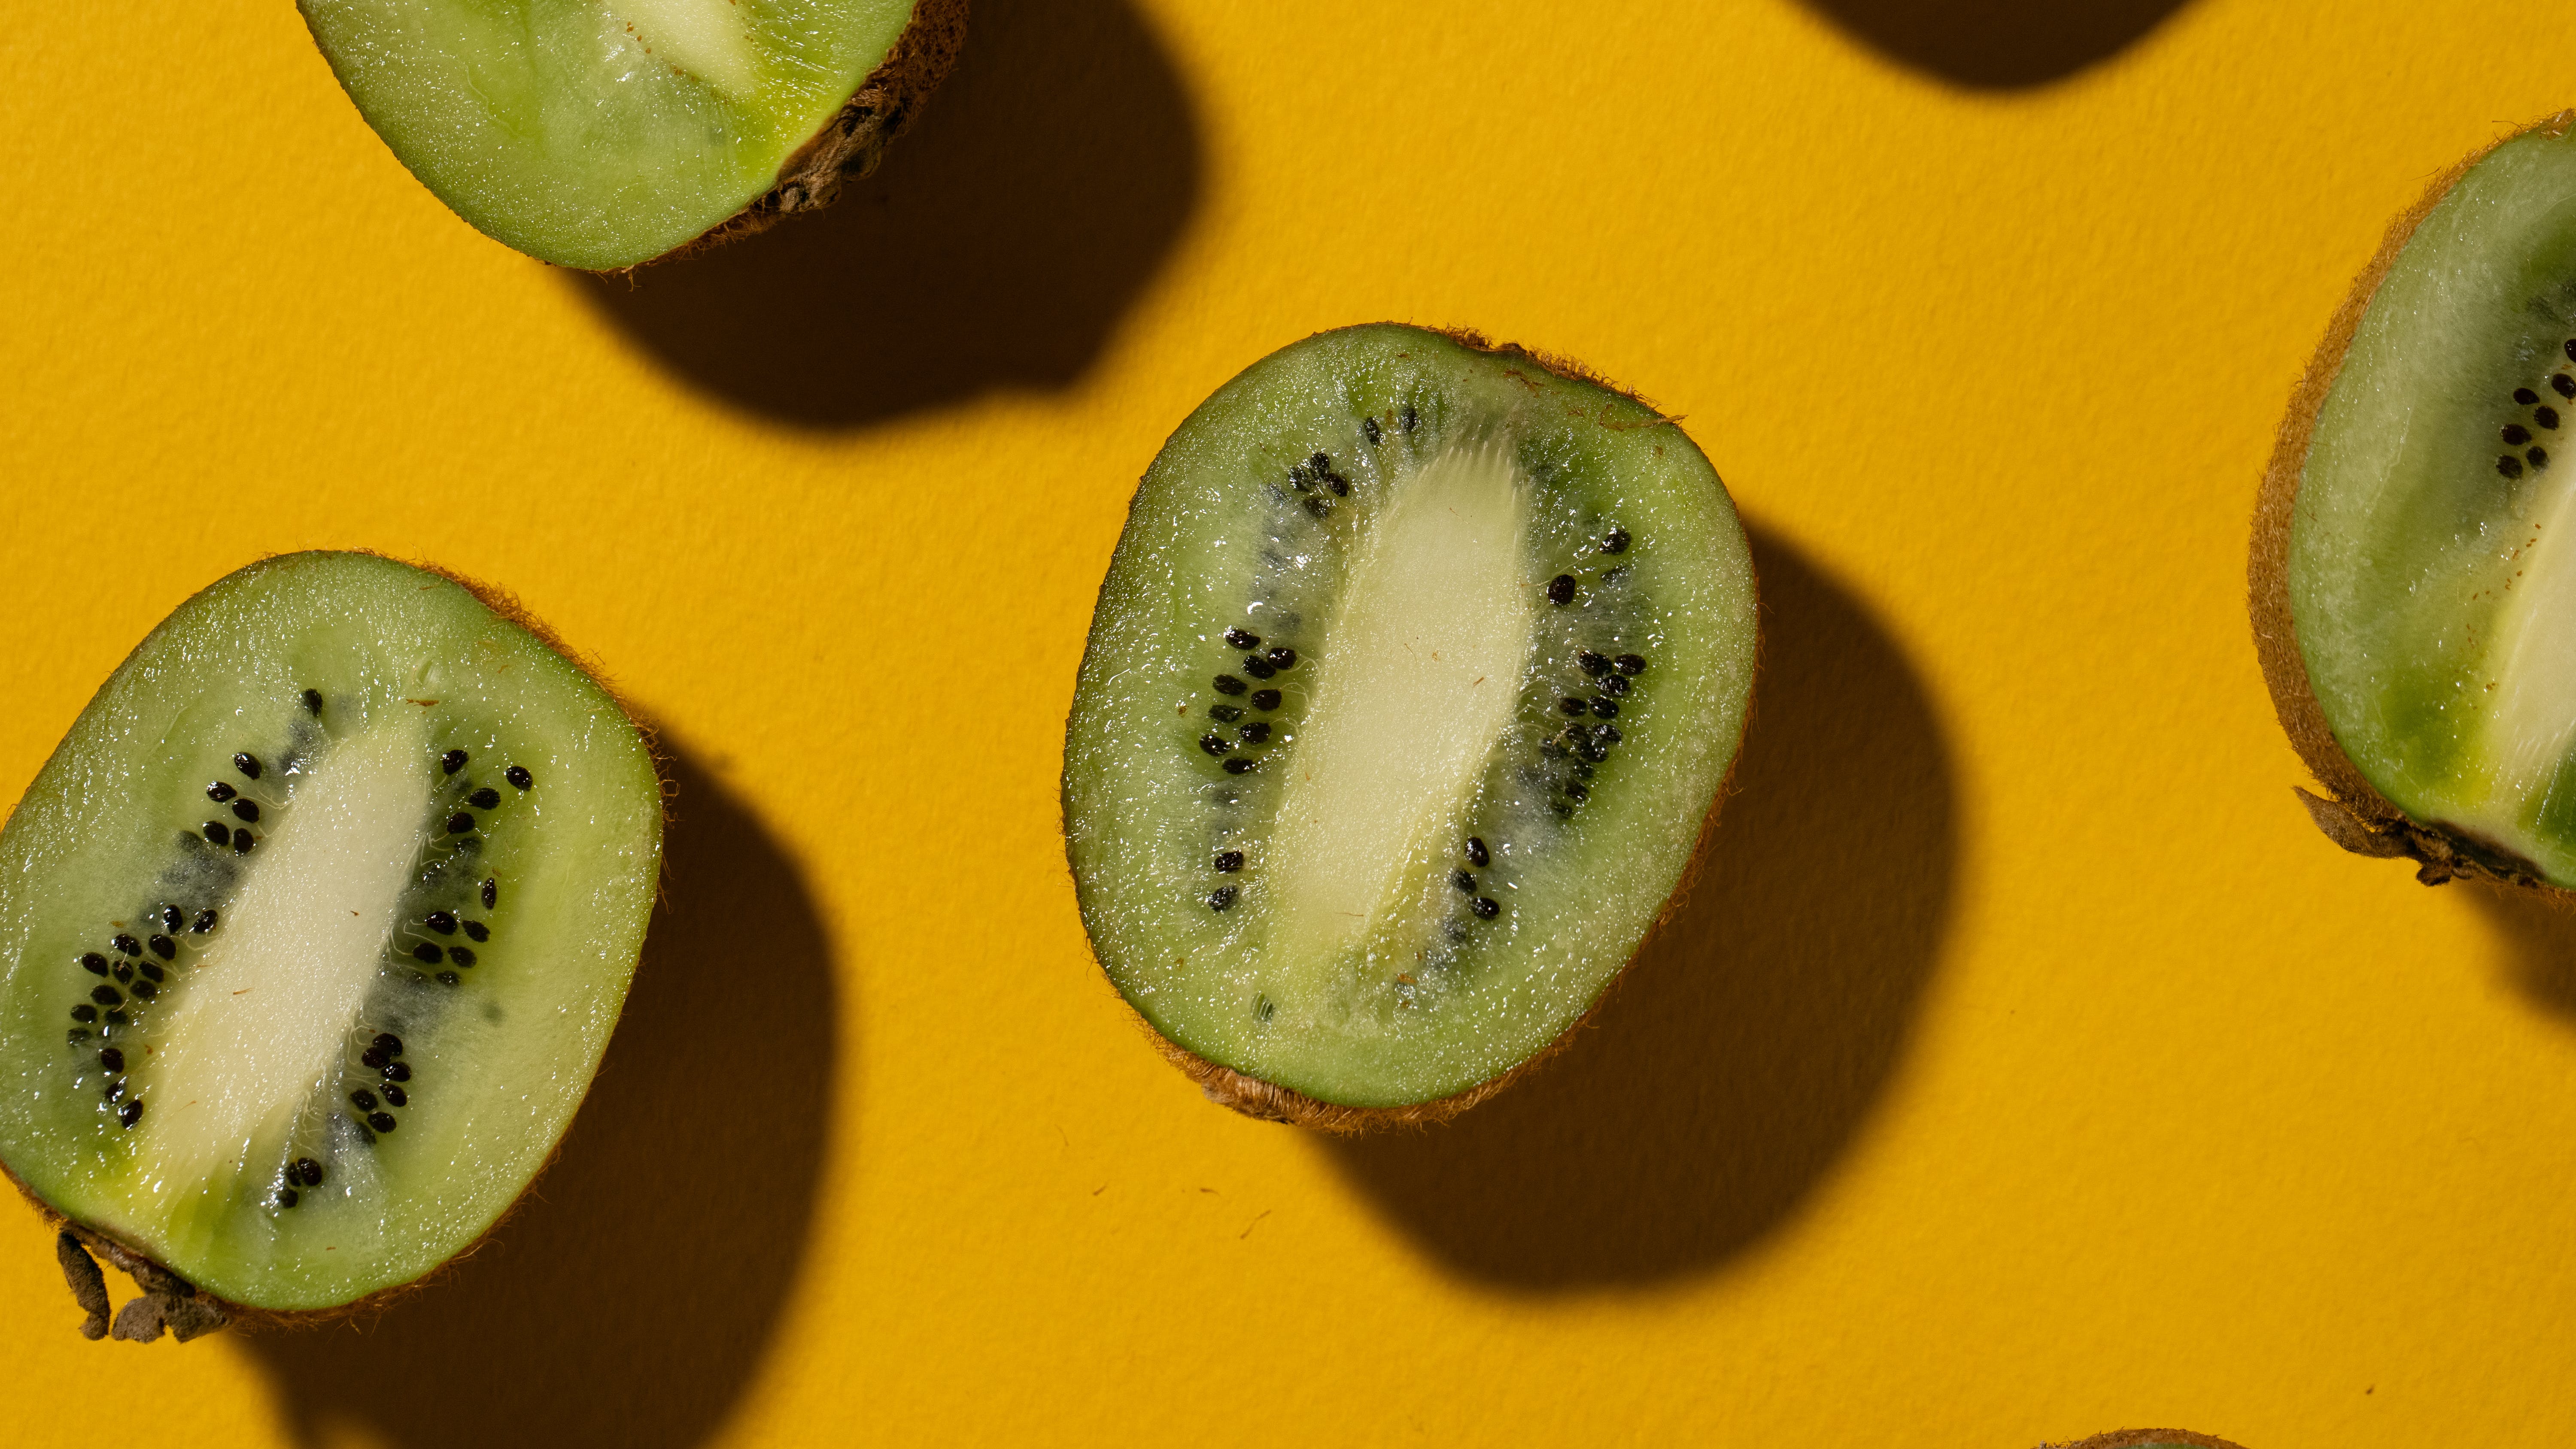 Research Finds Two Kiwis Can Fulfill Daily Dose of Vitamin C